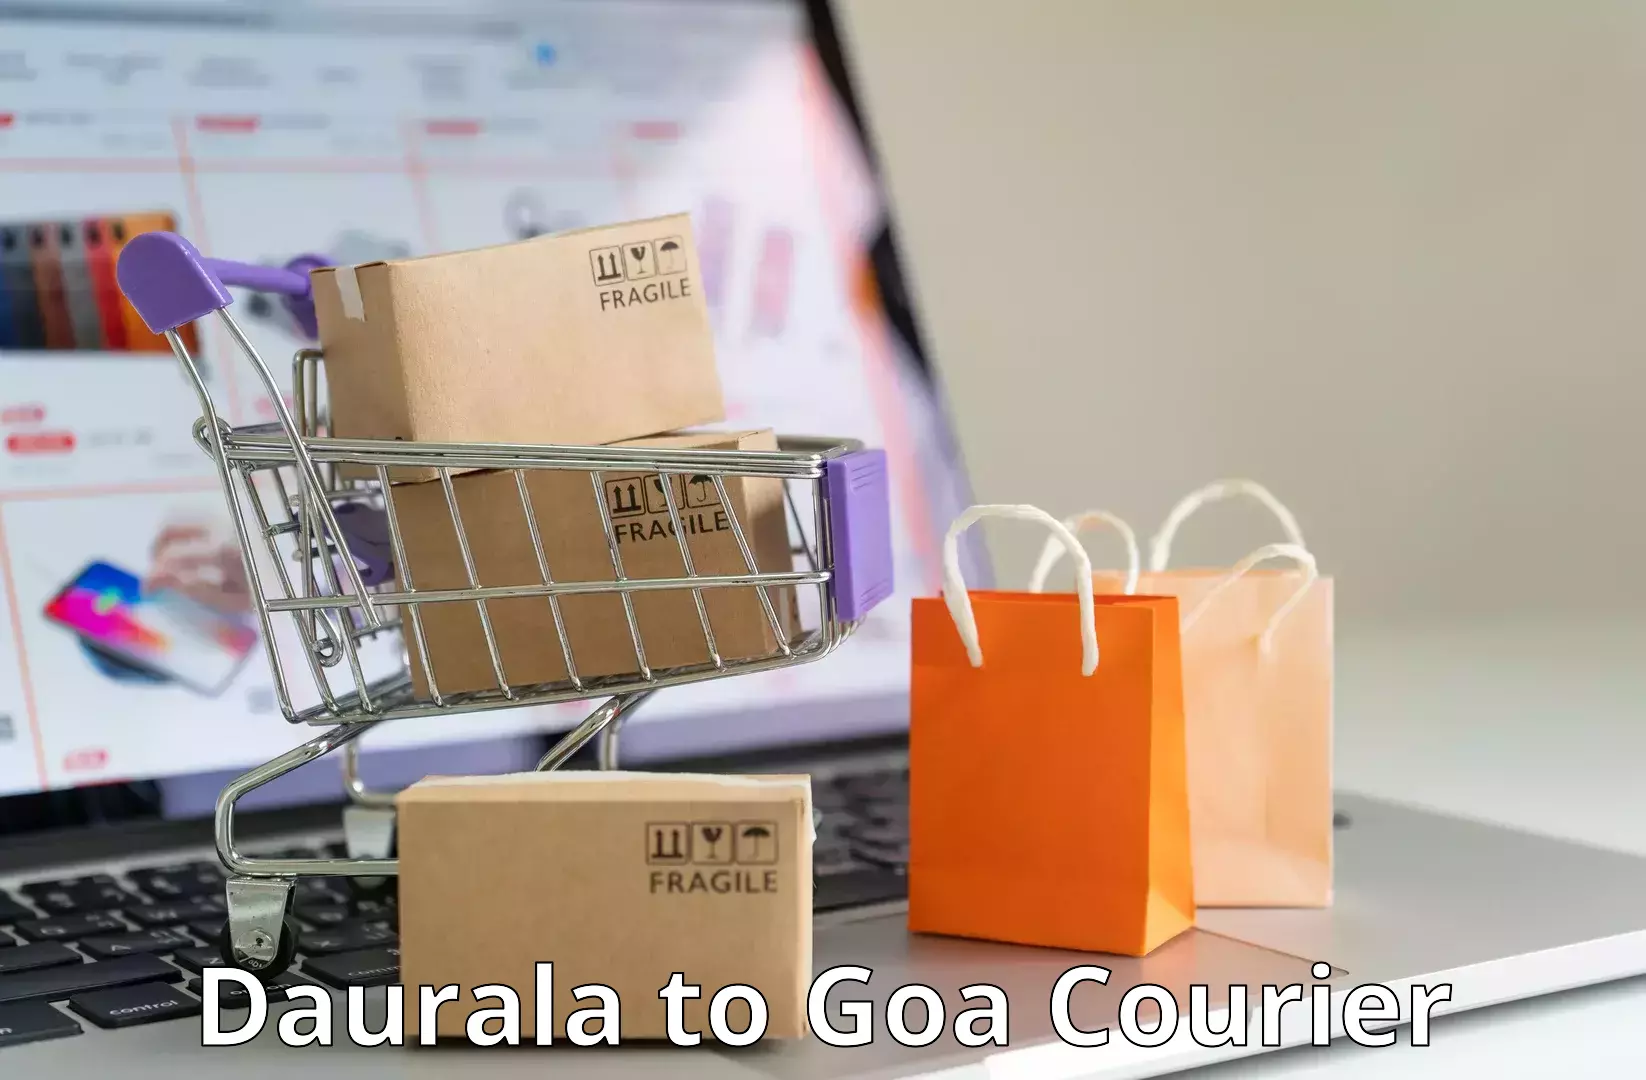 Sustainable delivery practices Daurala to Goa University